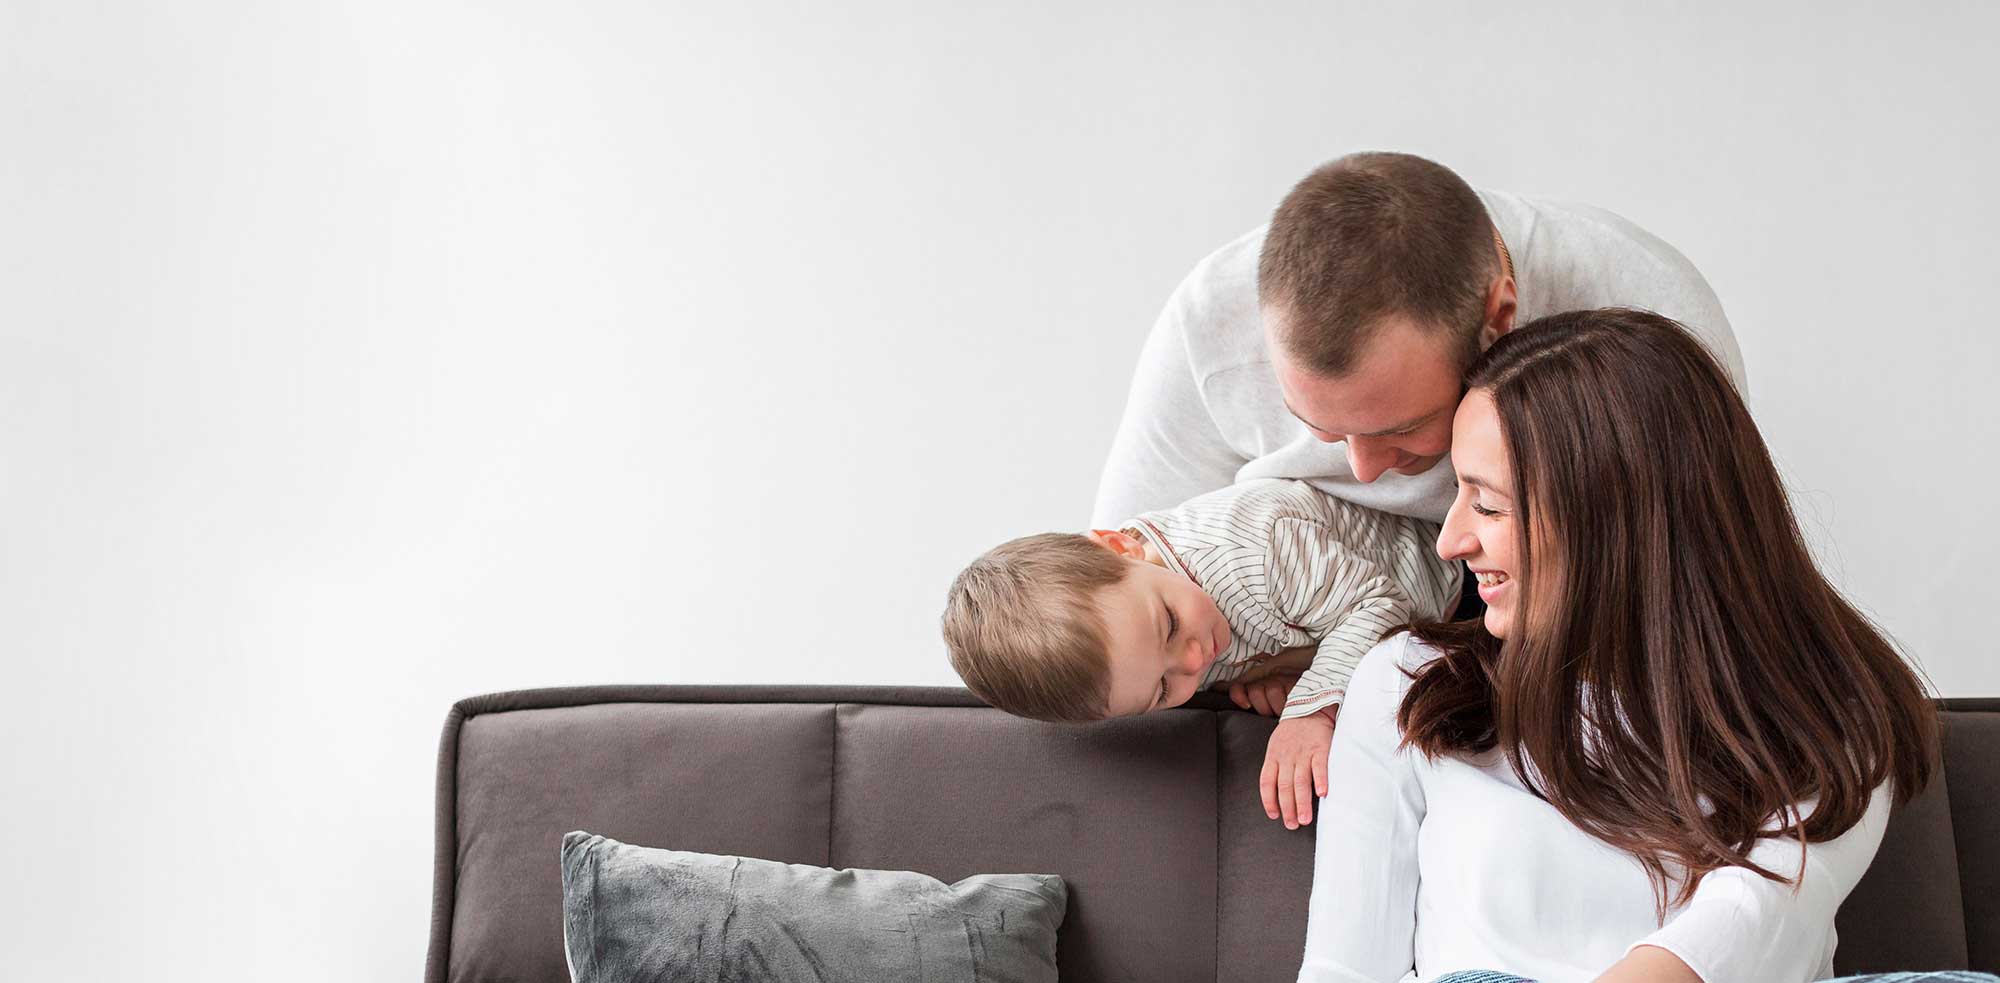 Man, woman, and child sitting on couch in insured home.